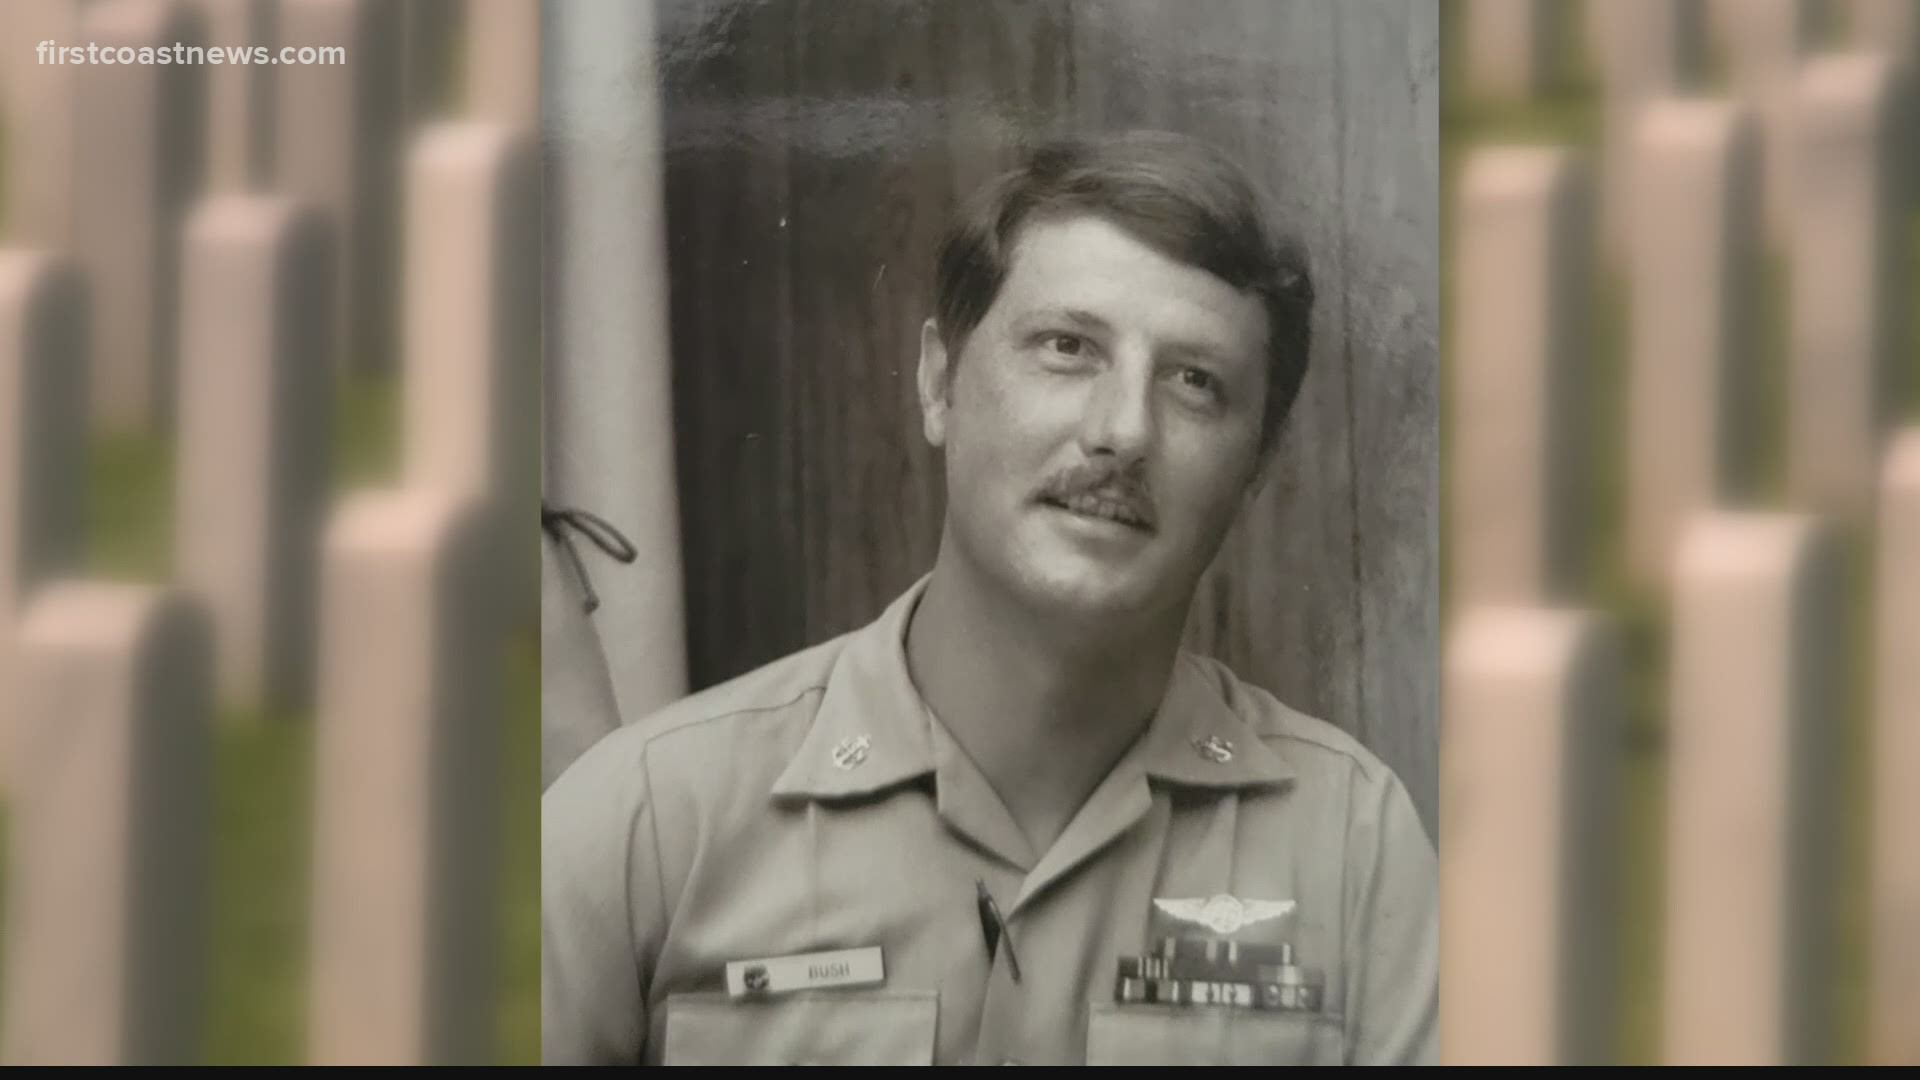 The family of Dennis Busch wants her husband to be moved to the Jacksonville National Cemetery, but the cost is too expensive.